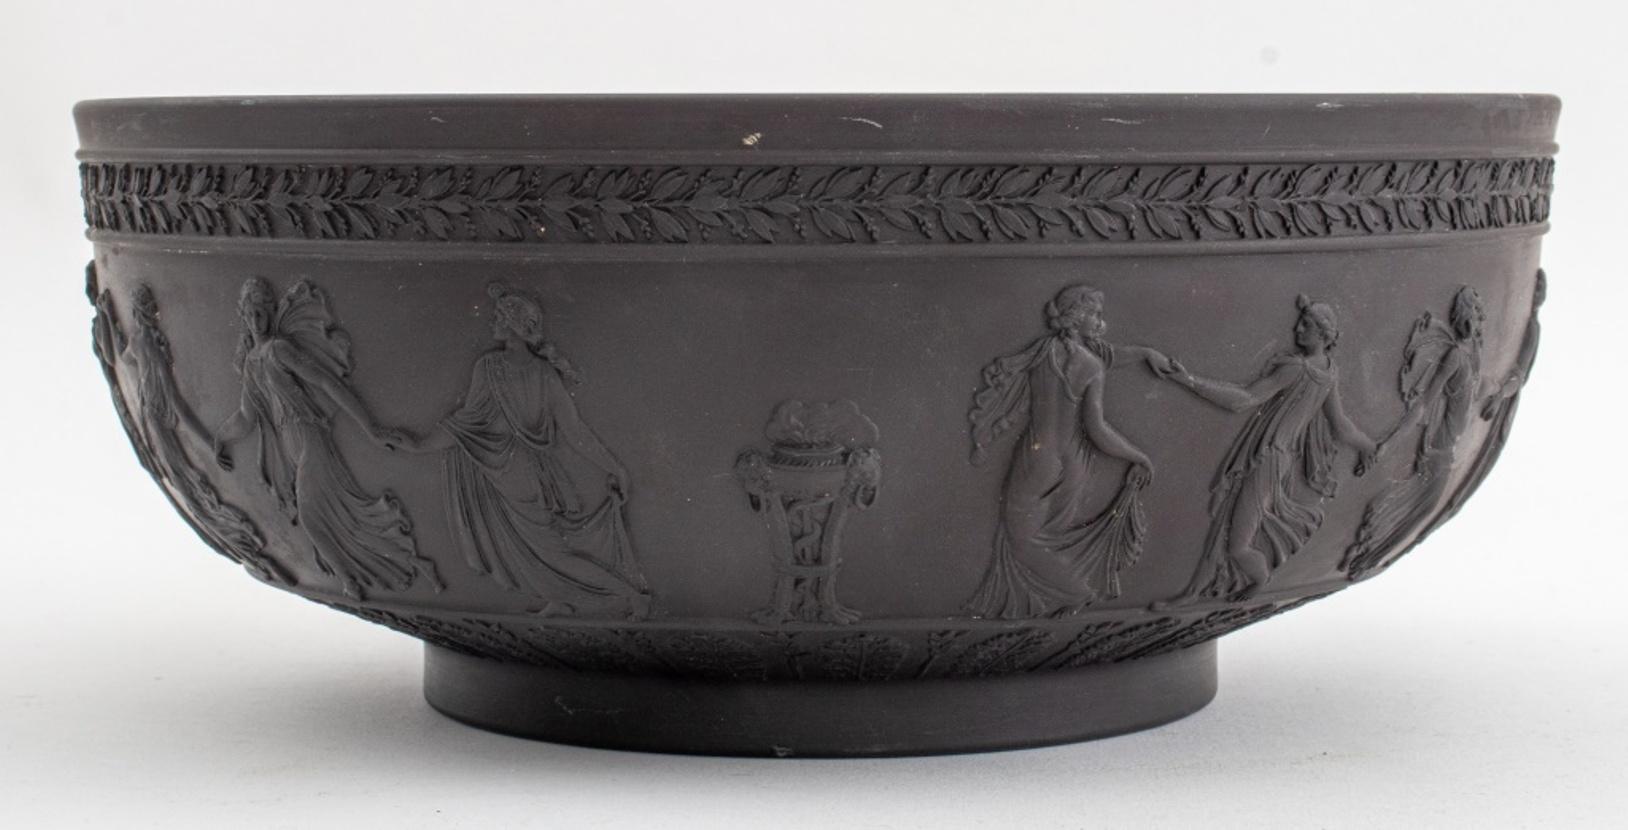 Wedgewood black basalt jasperware fruit bowl, dancing women (the Hours) surround the middle with berry and acanthus leaf bands, impressed 